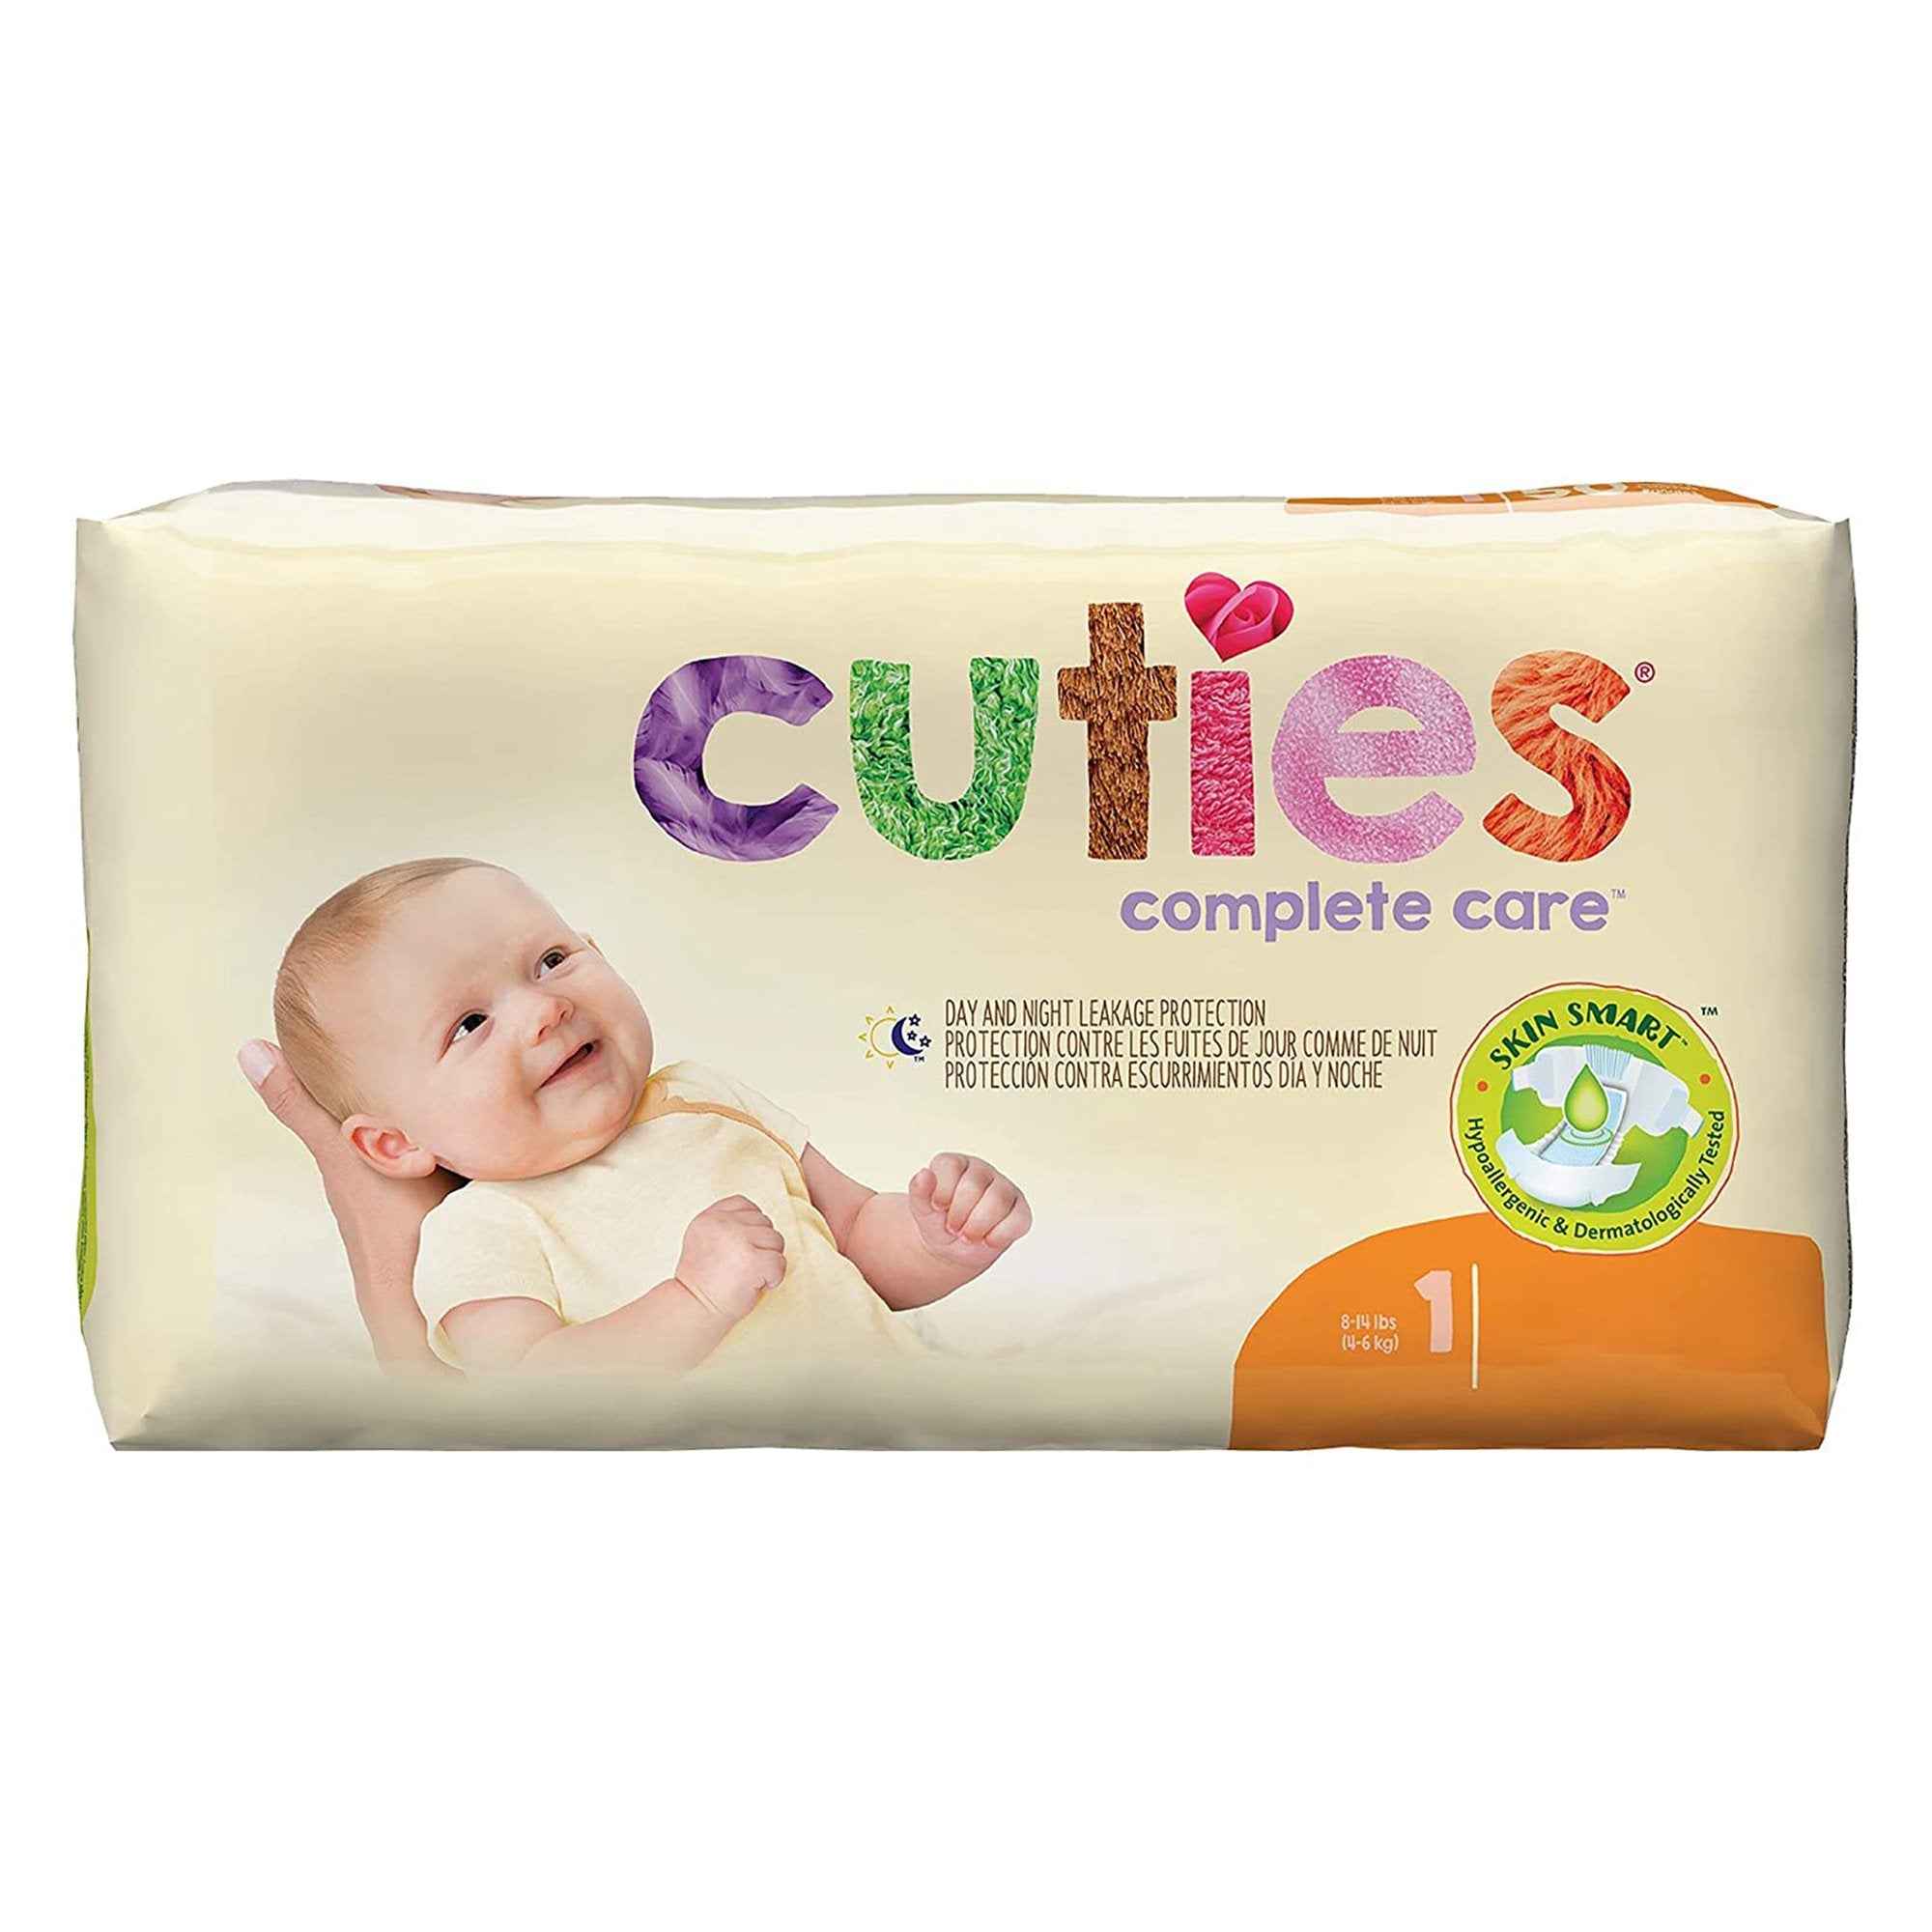 Cuties Complete Care Diapers, Size 1